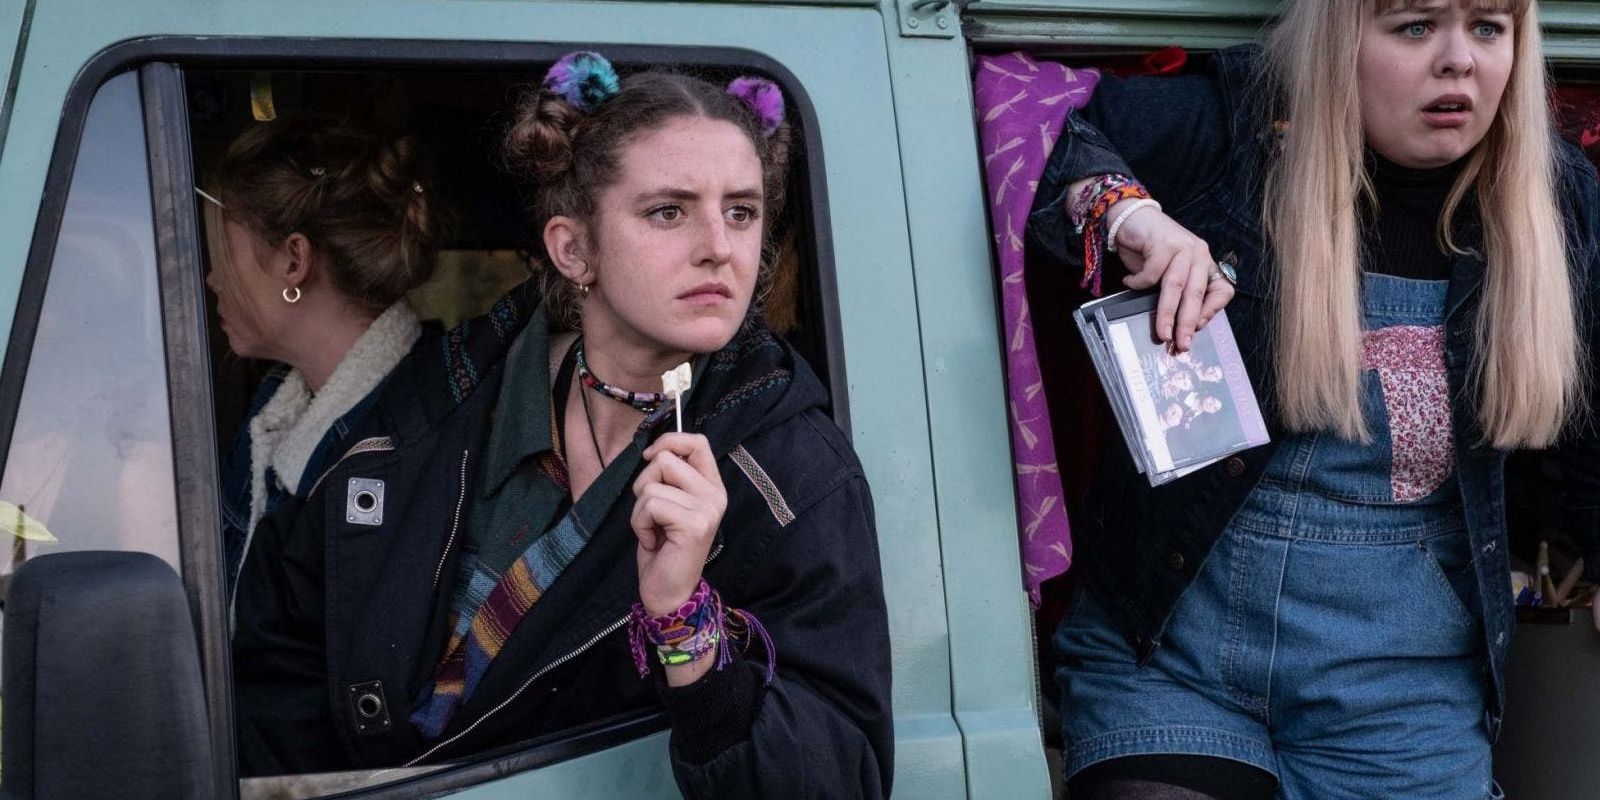 Orla and Claire in a minivan traveling to Belfast in a still from Derry Girls